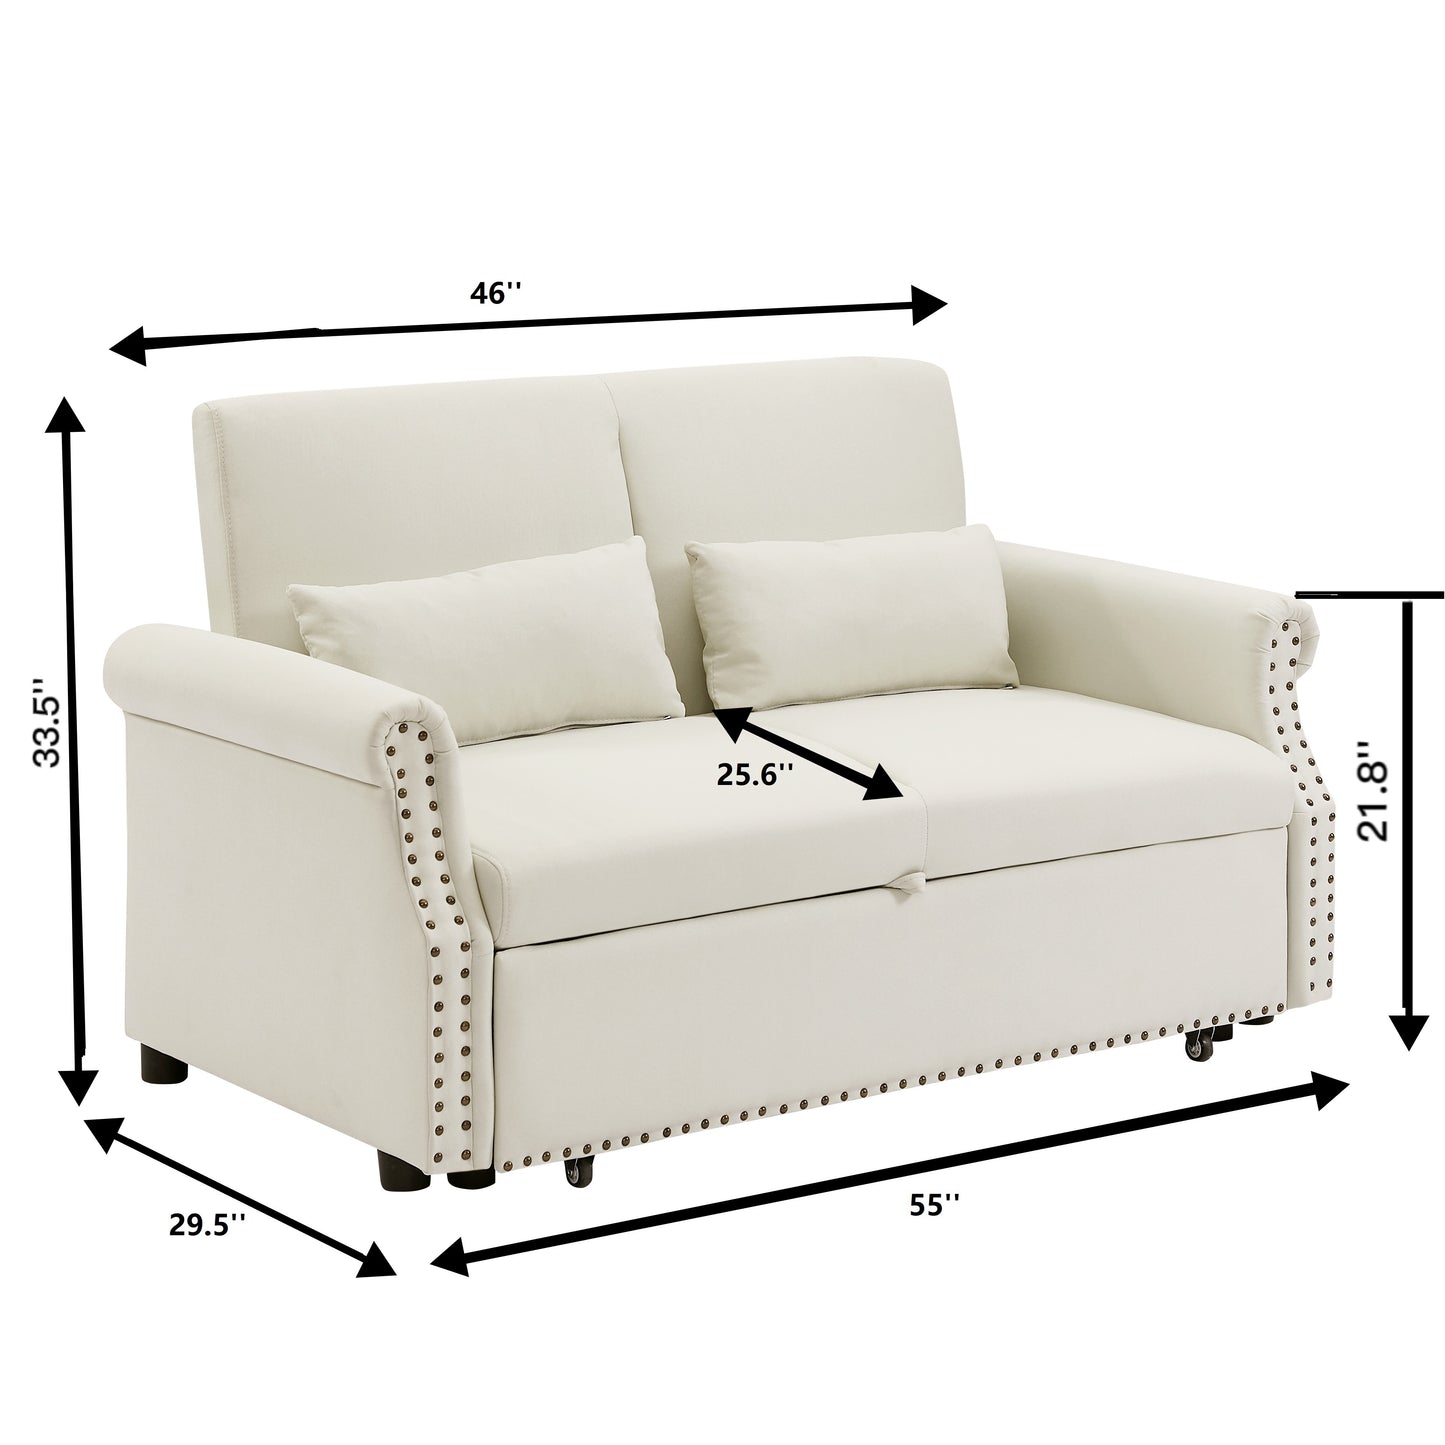 55" Pull Out Sleep Sofa Bed 2 Seater Loveseats Sofa Couch